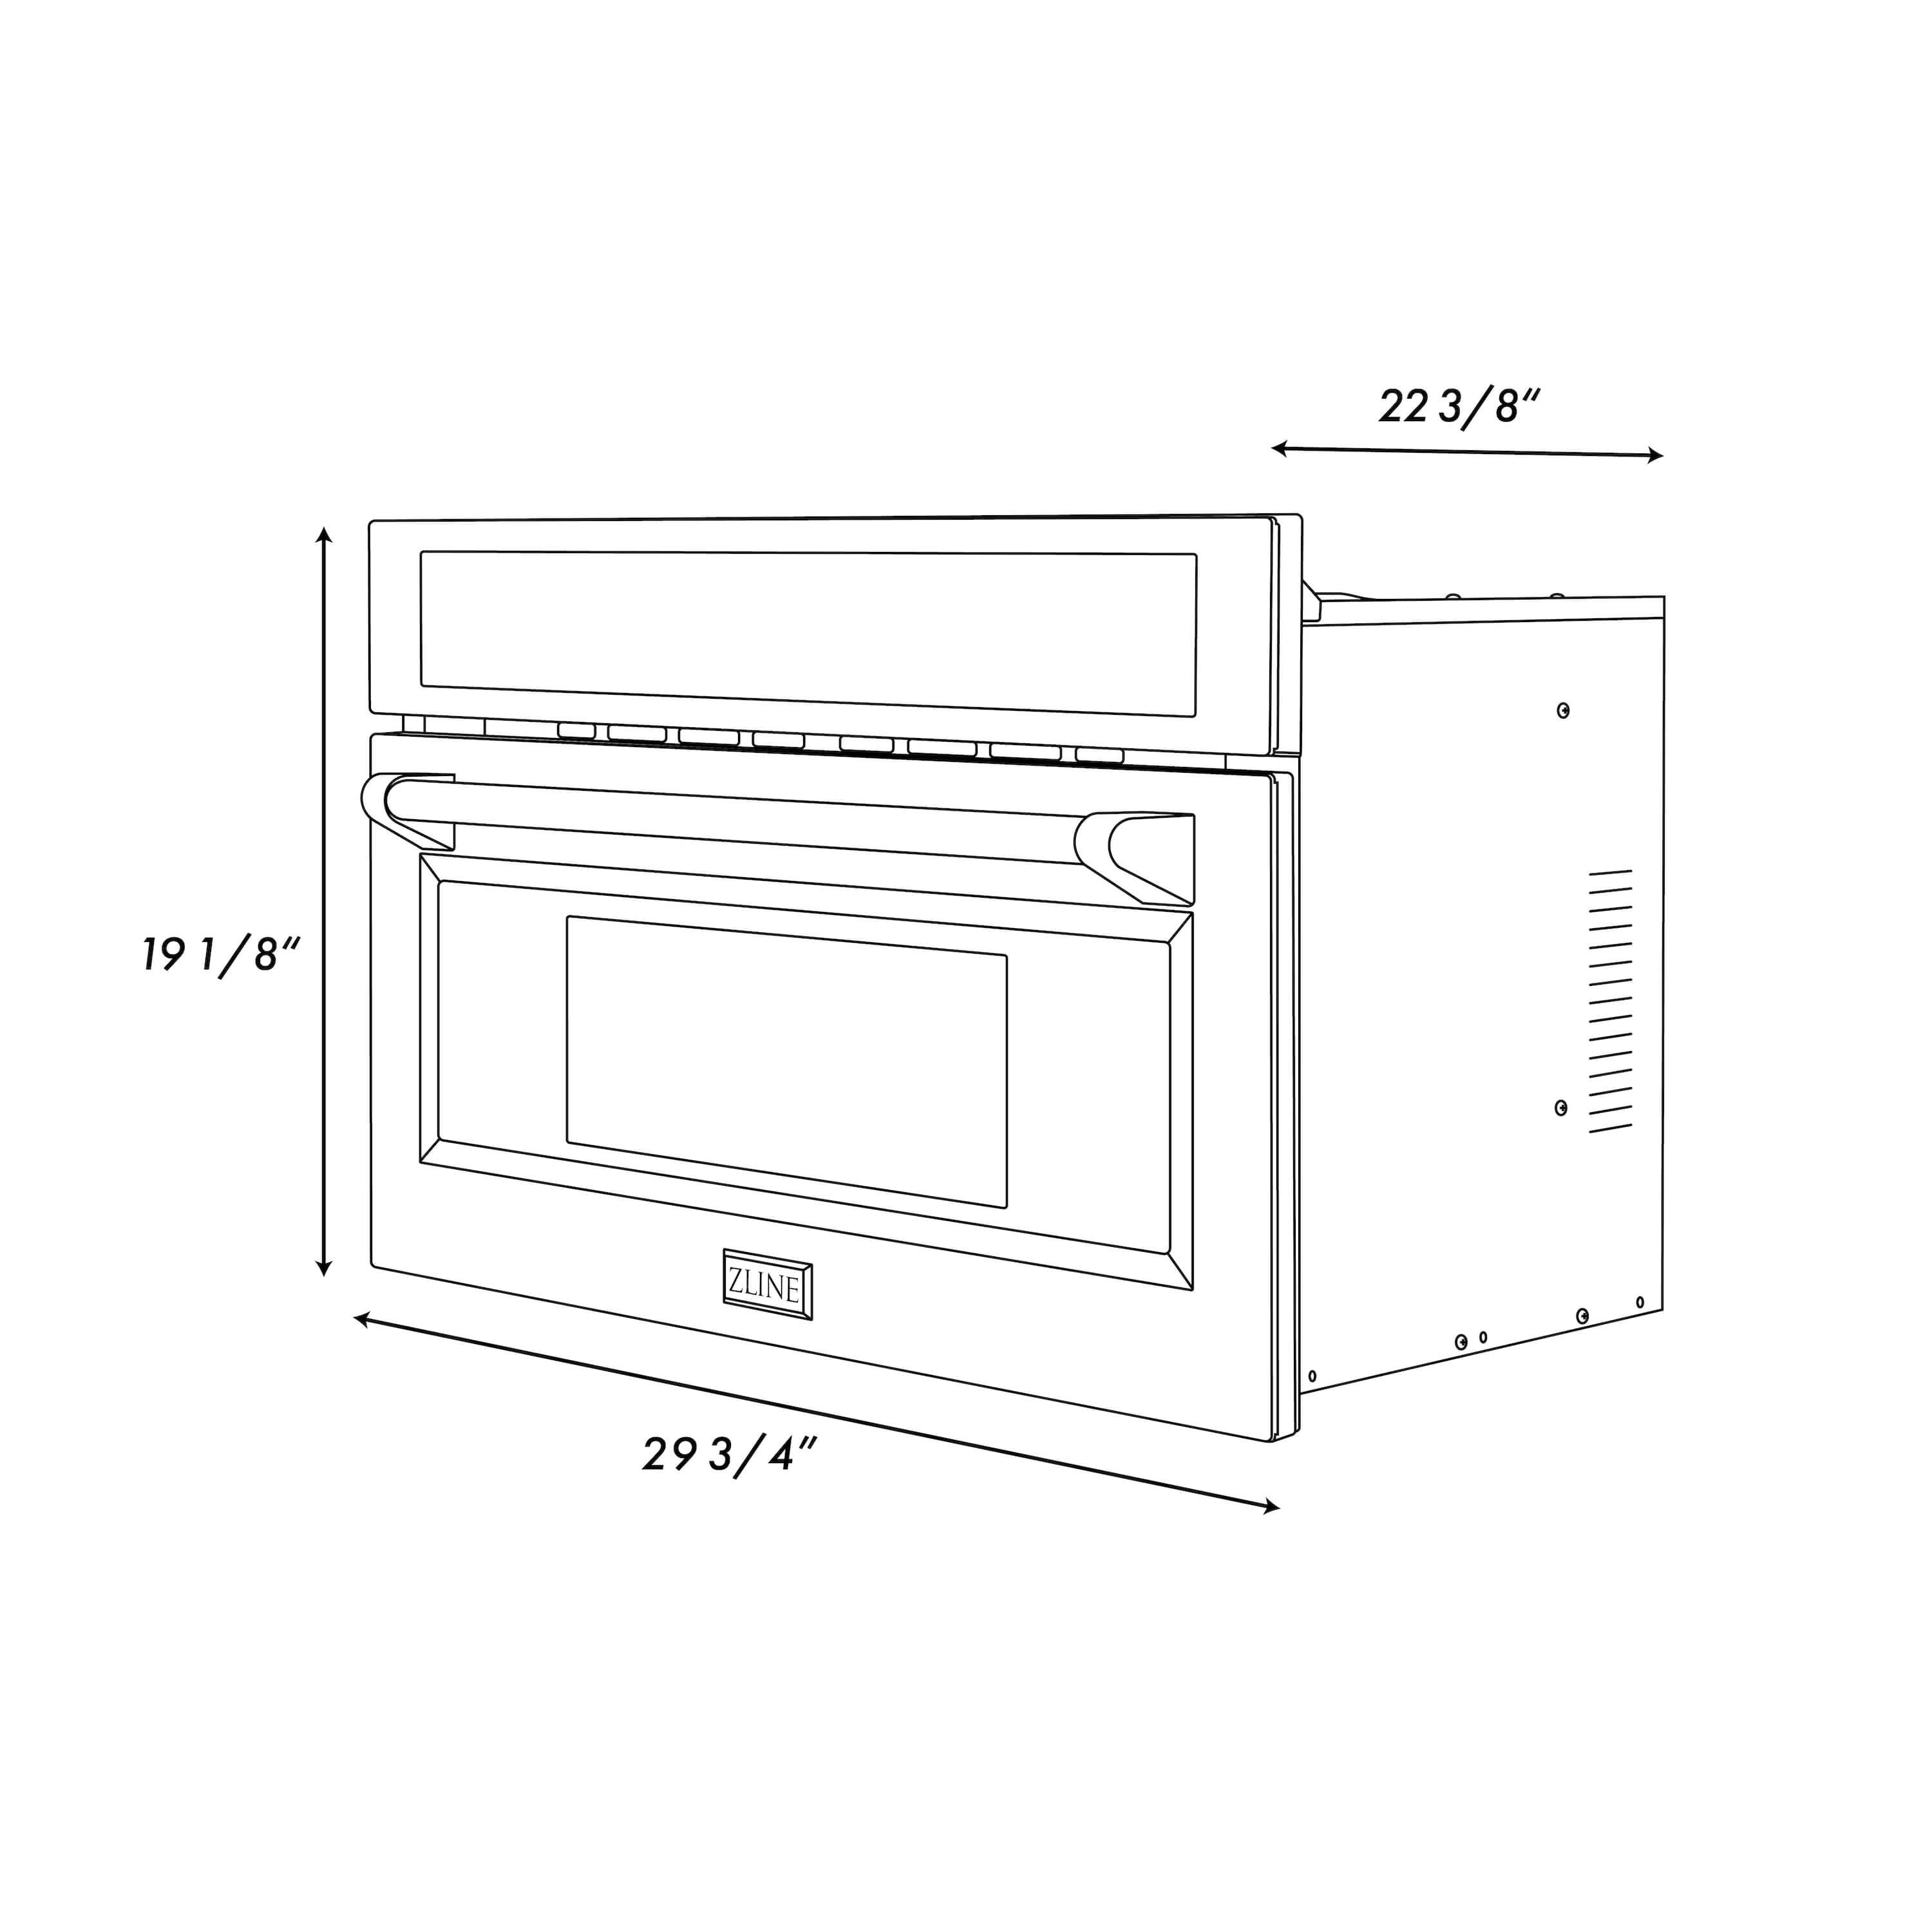 ZLINE 30 in. 1.6 cu ft. Built-in Convection Microwave Oven in Fingerprint Resistant Stainless Steel (MWO-30-SS) dimensional diagram with measurements.